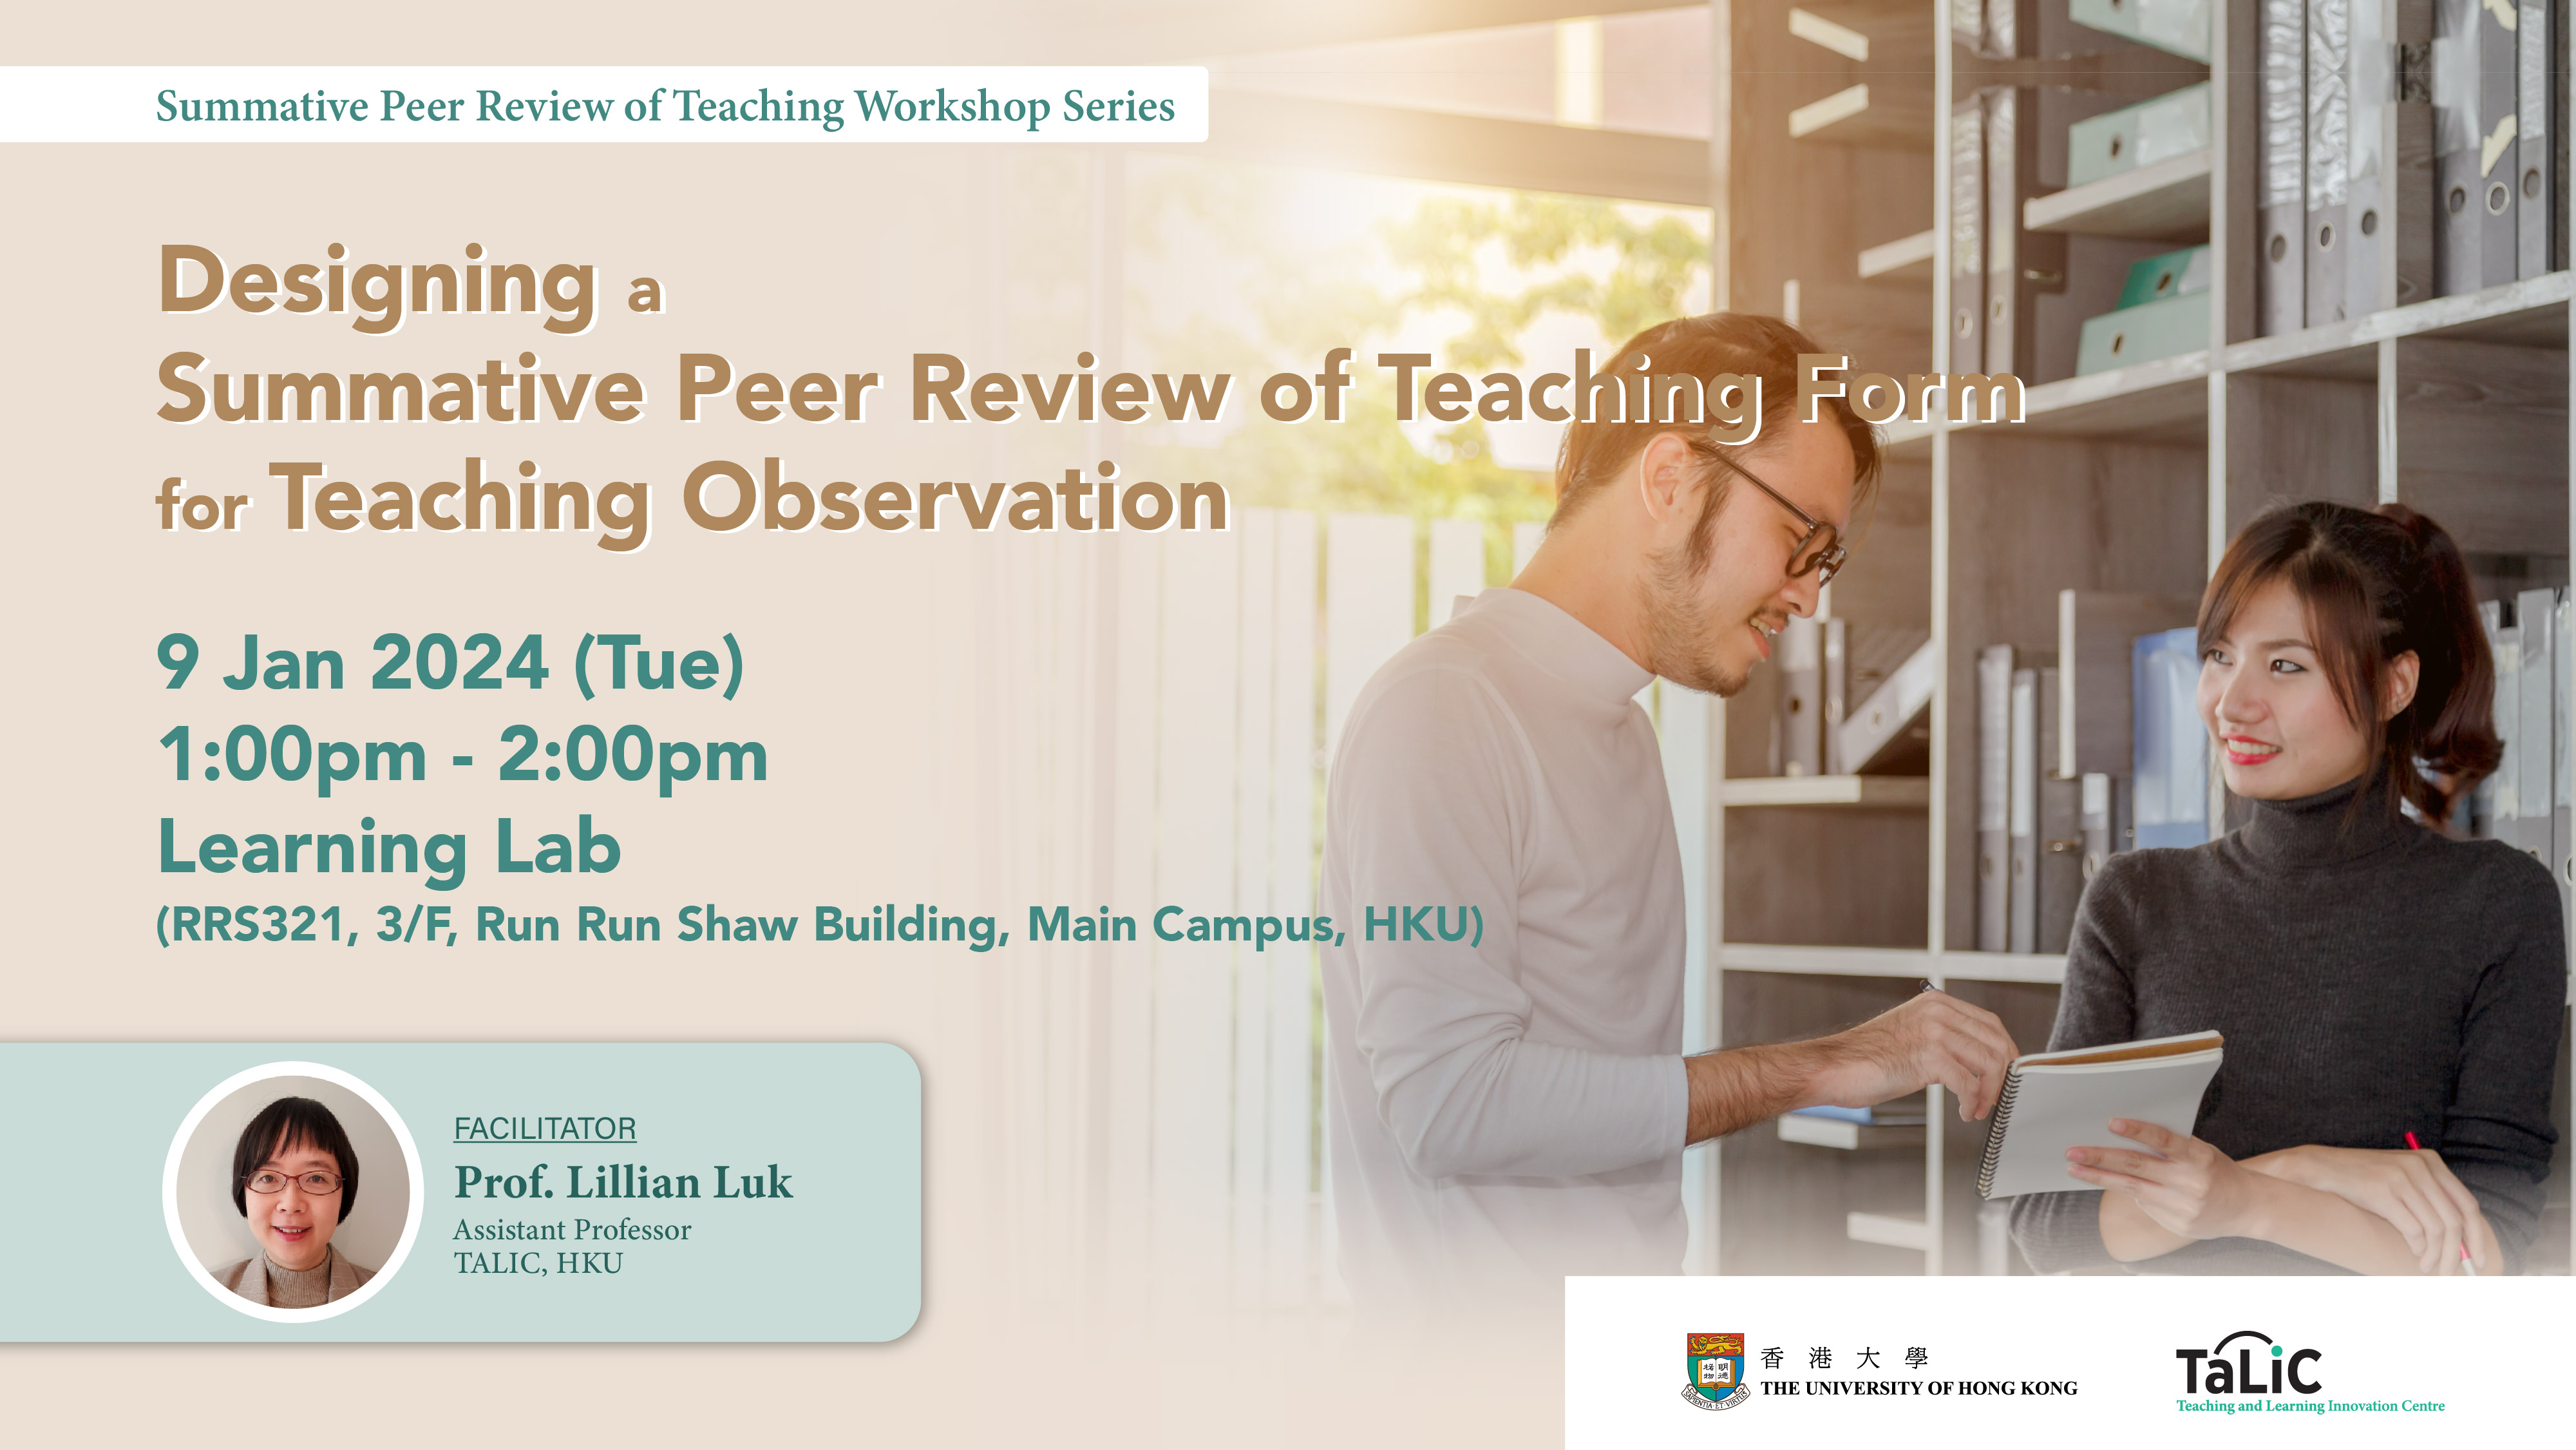 Designing a Summative Peer Review of Teaching Form for Teaching Observation